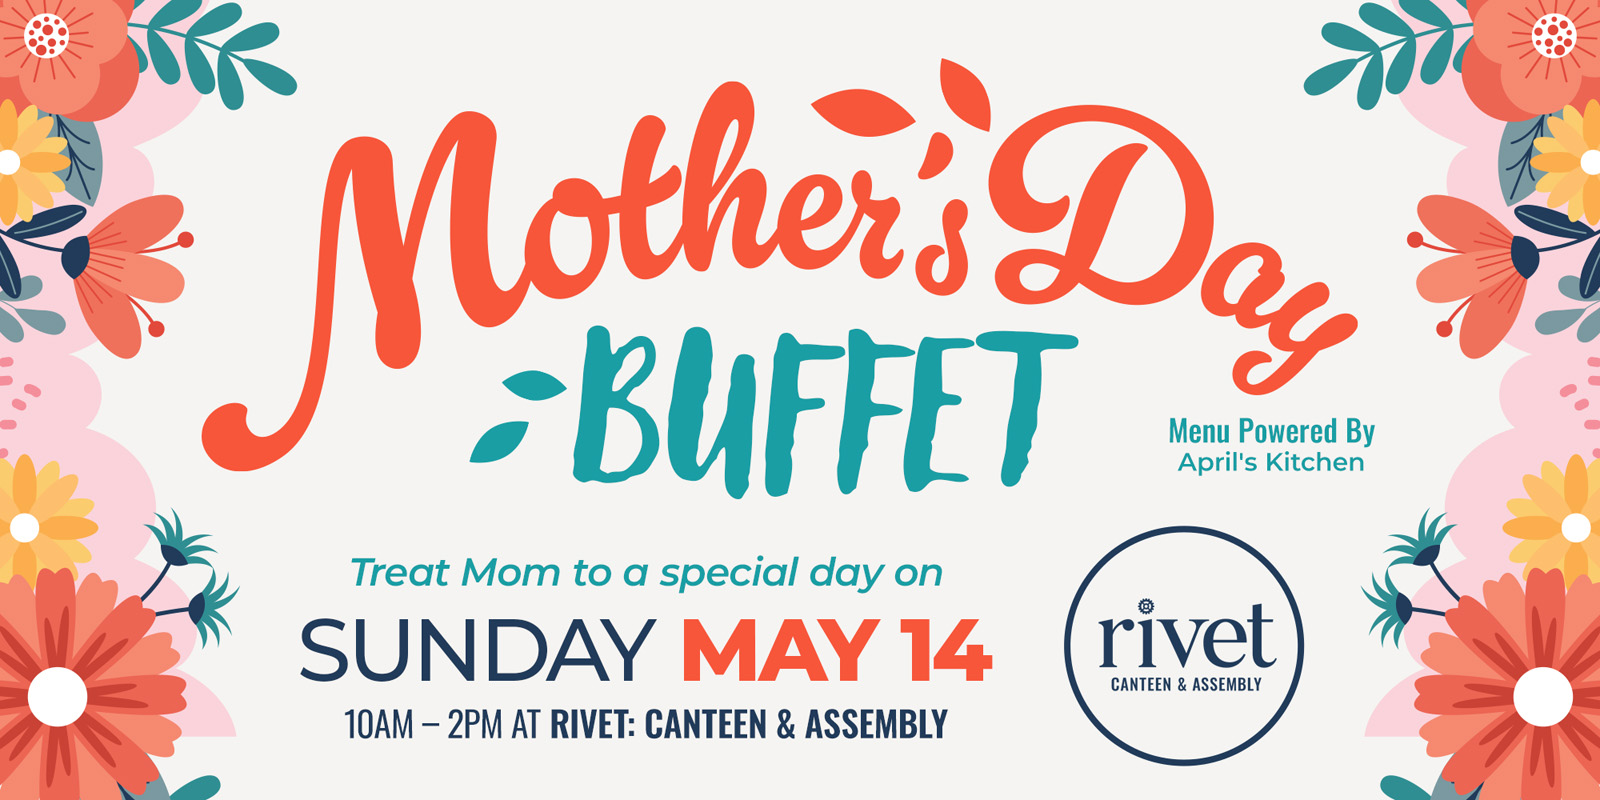 Join us on Sunday, May 14th from 10:00 AM to 2:00 PM, as we honor the love and care that mothers provide with an unforgettable brunch buffet experience at our Mother's Day Buffet event!